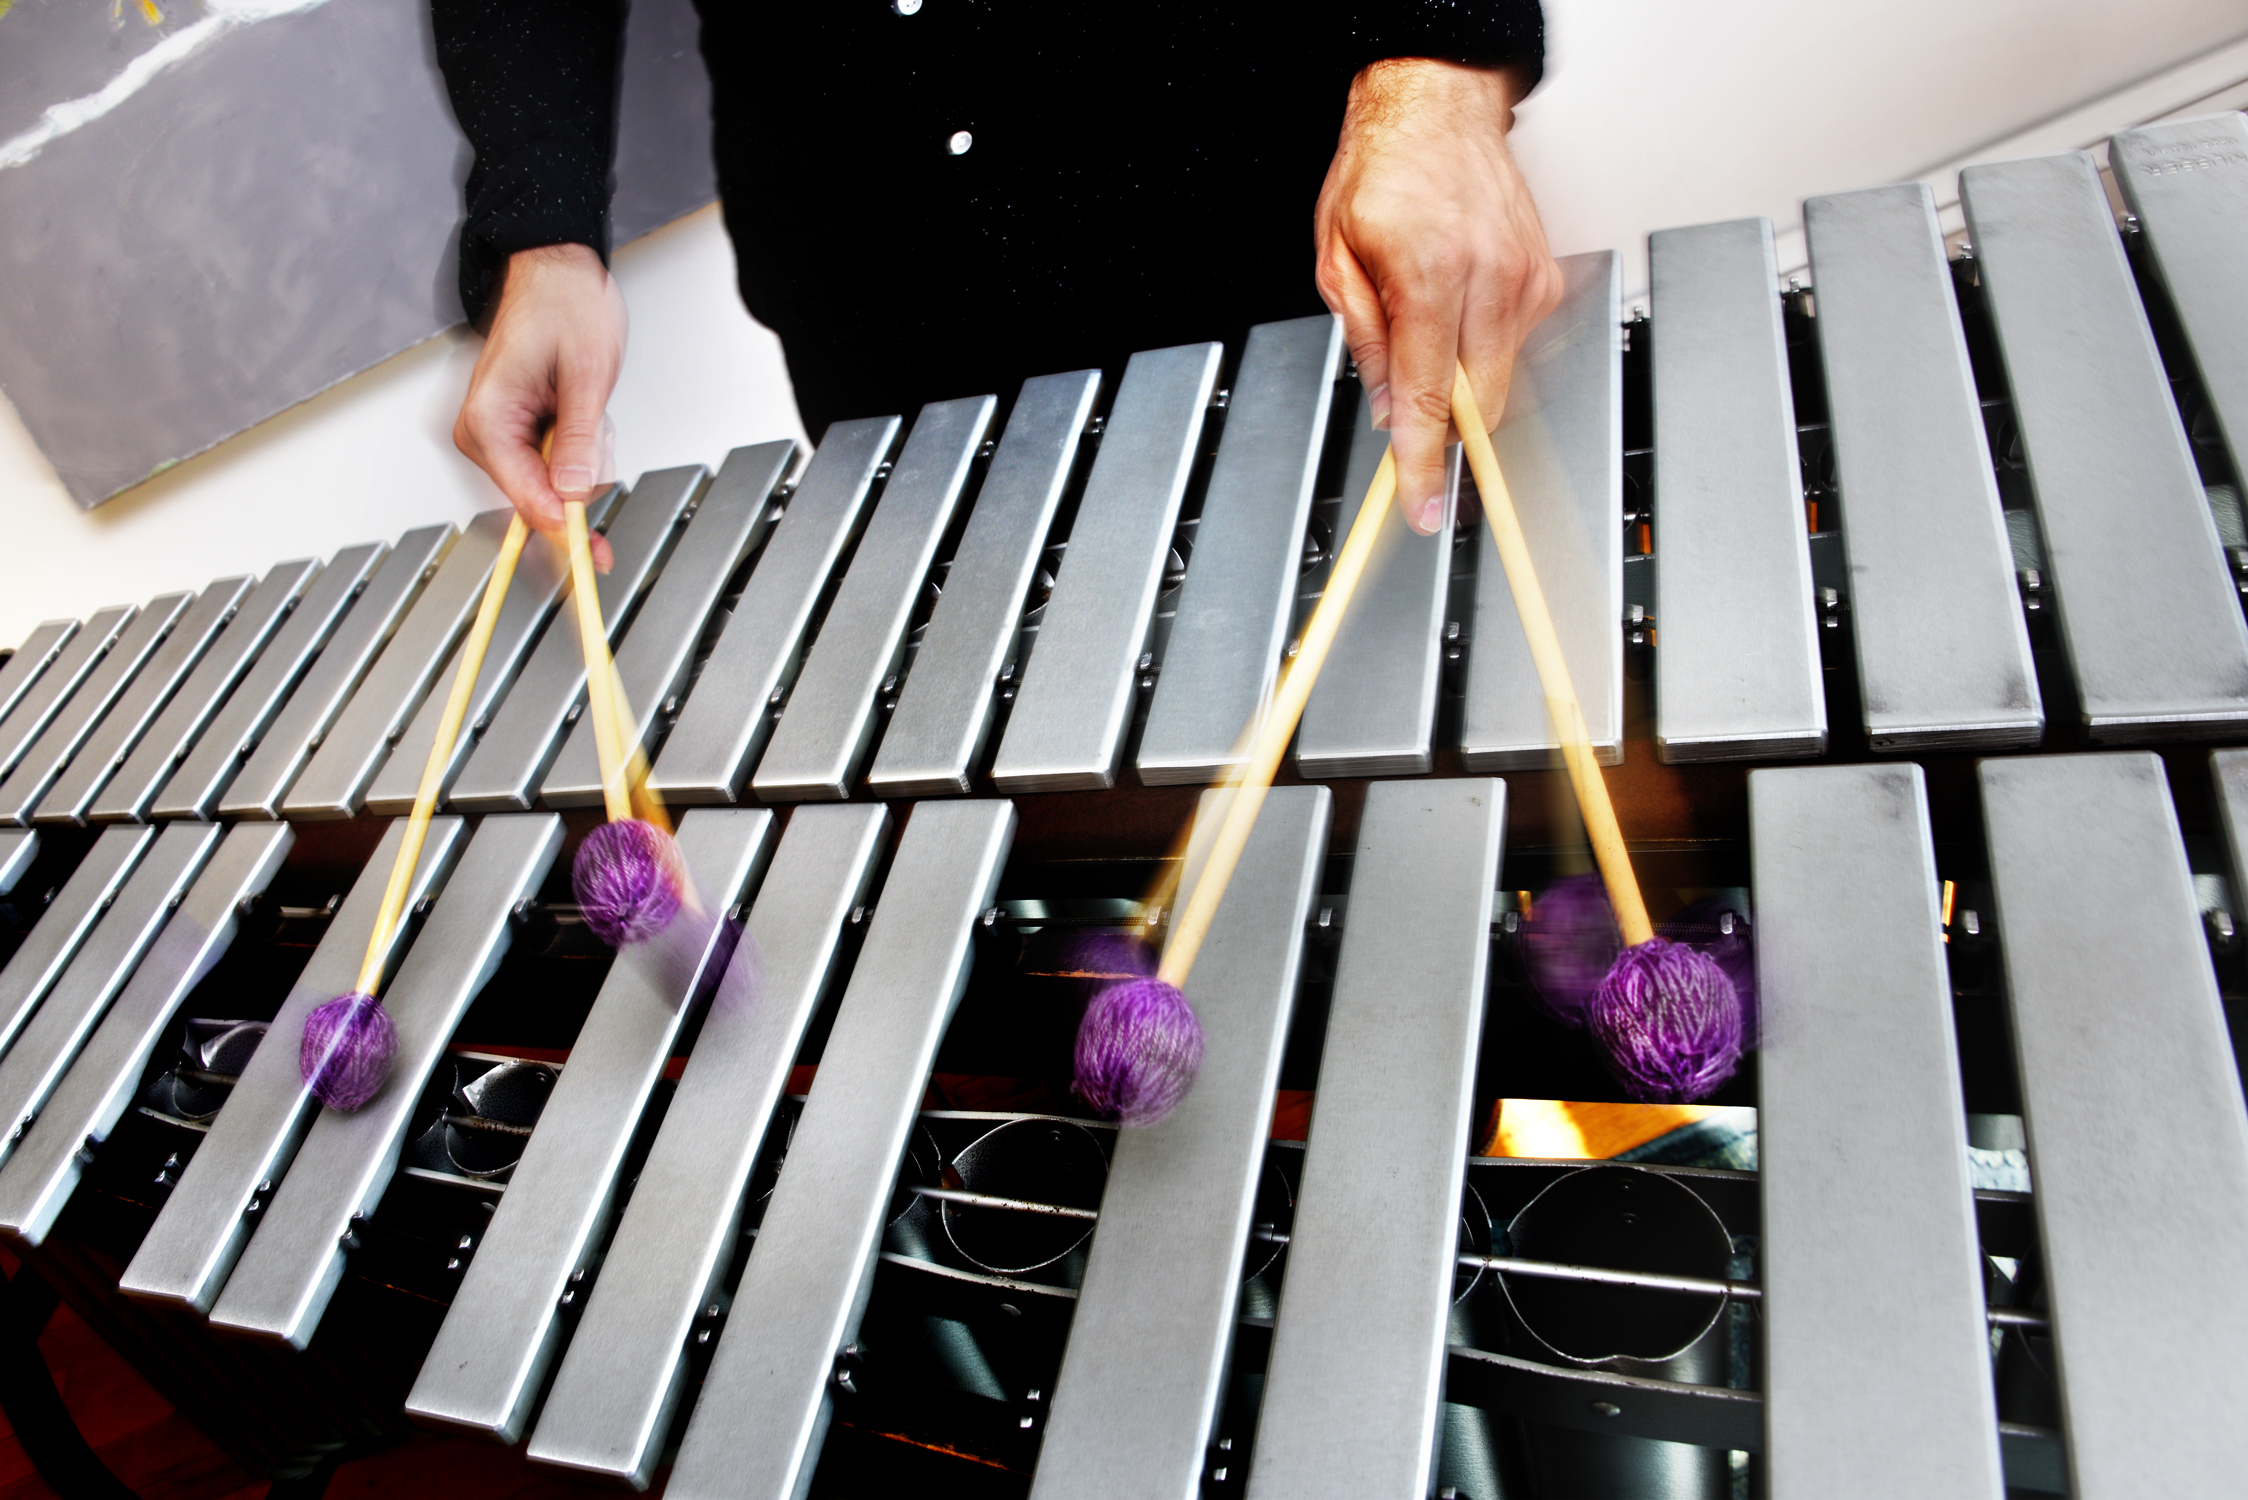 Vibraphonist from Brooklyn creates ethereal music, finding inspiration ...